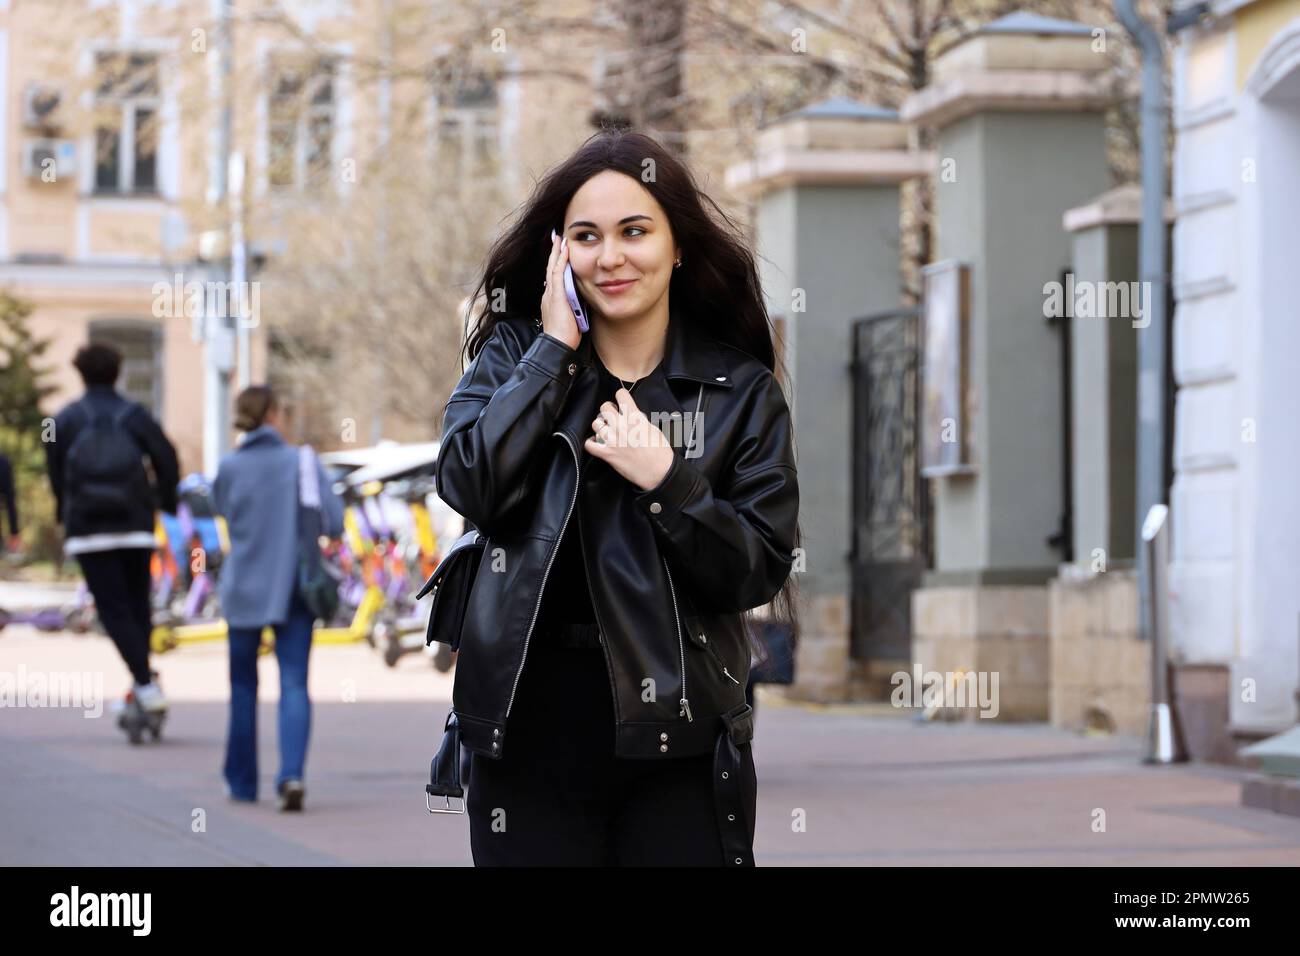 Attractive smiling girl talking on smartphone while walking down street. Using mobile phone in spring city Stock Photo